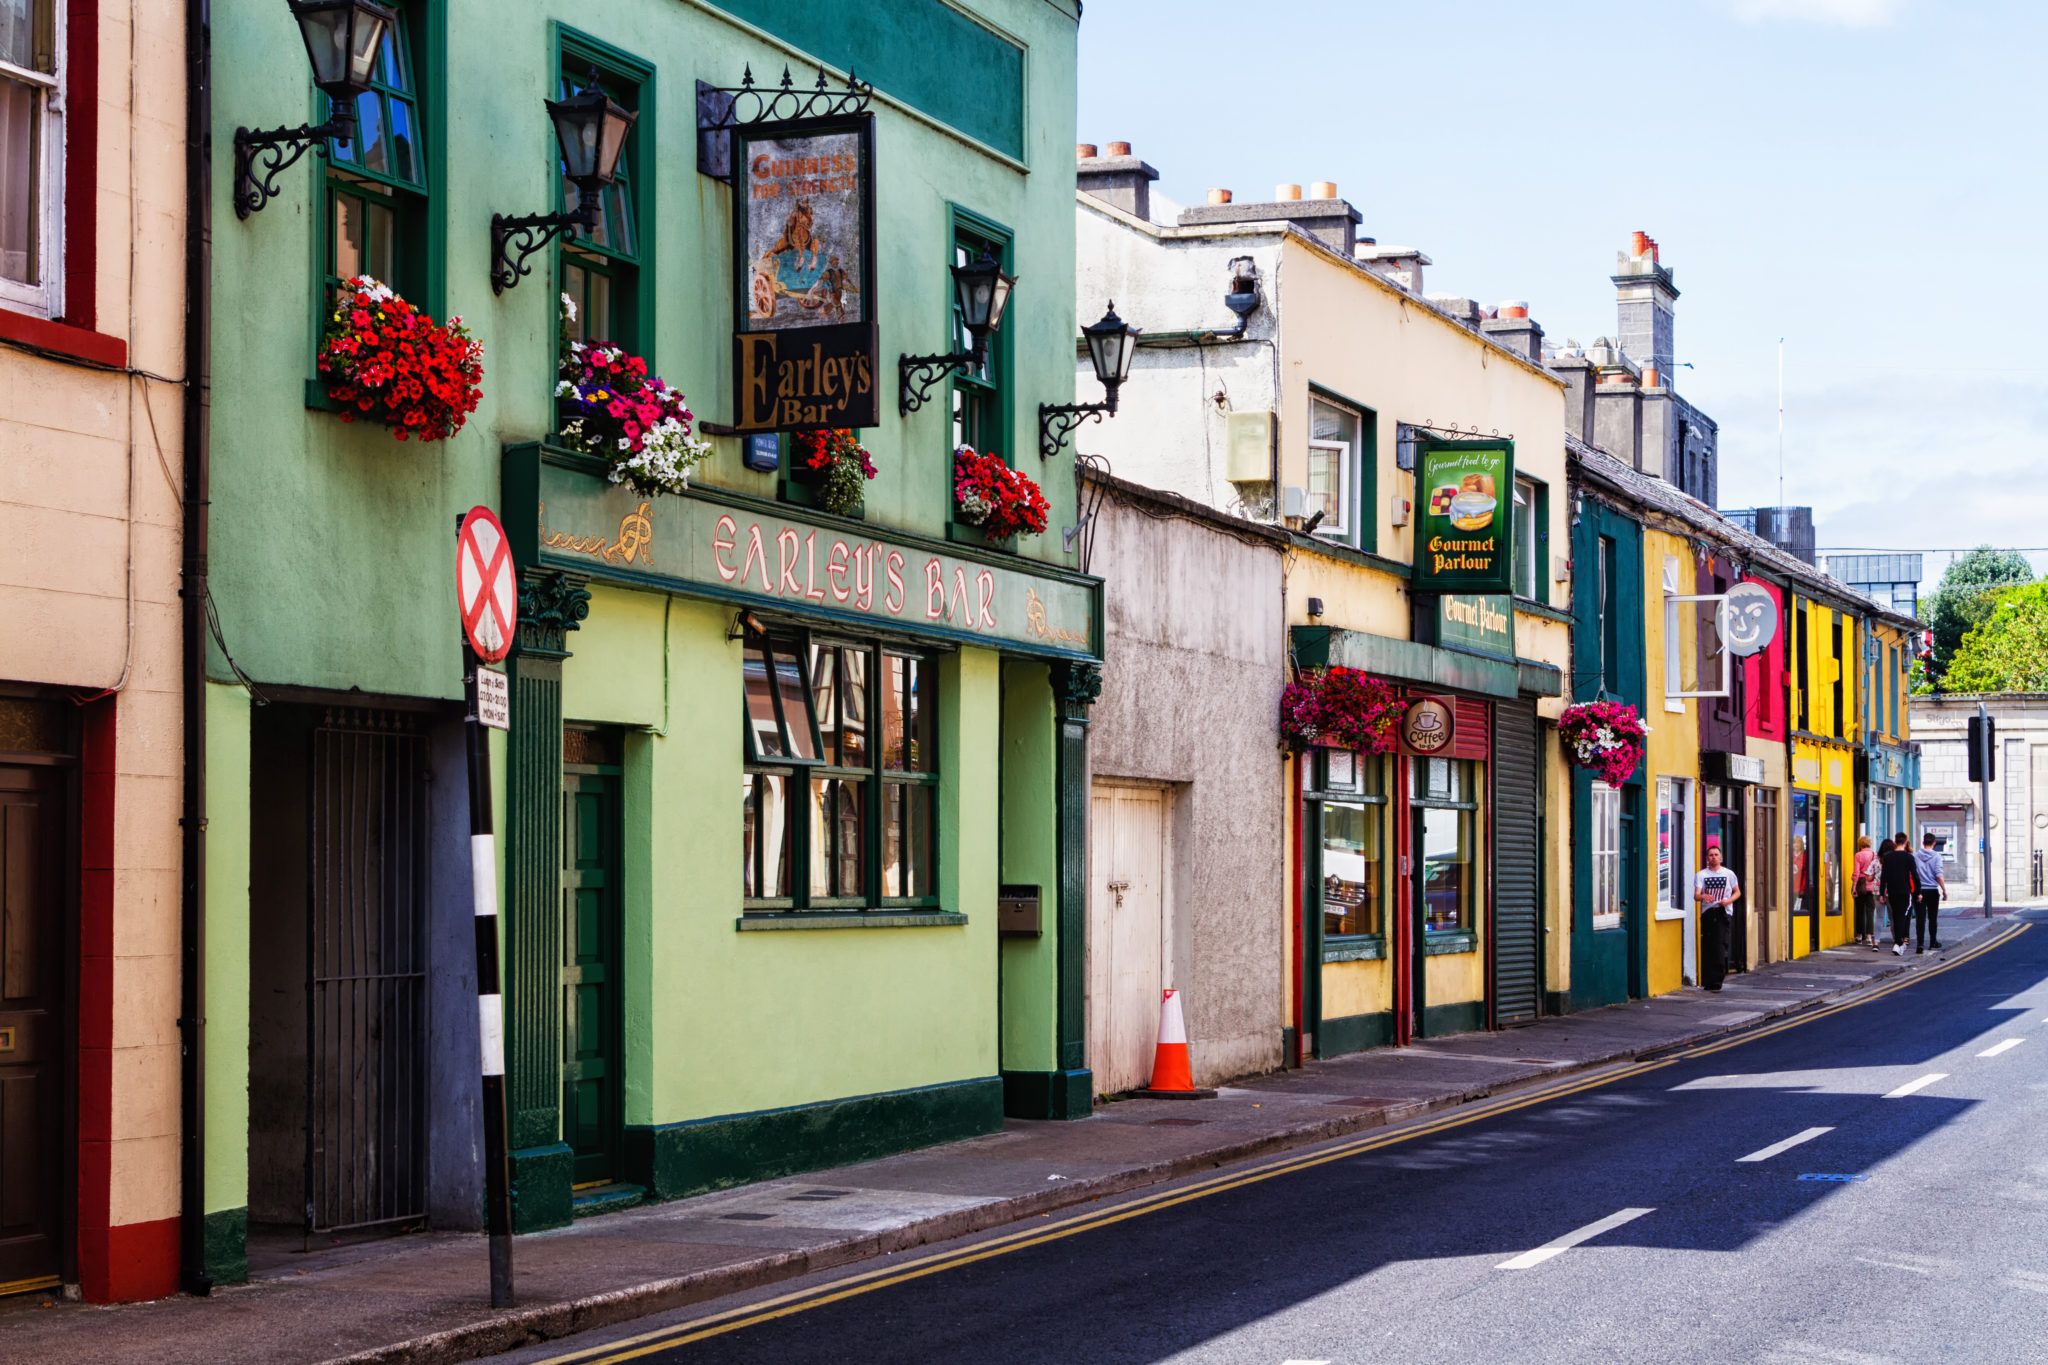 The number of Irish pubs has declined by 21.2% in the last two decades